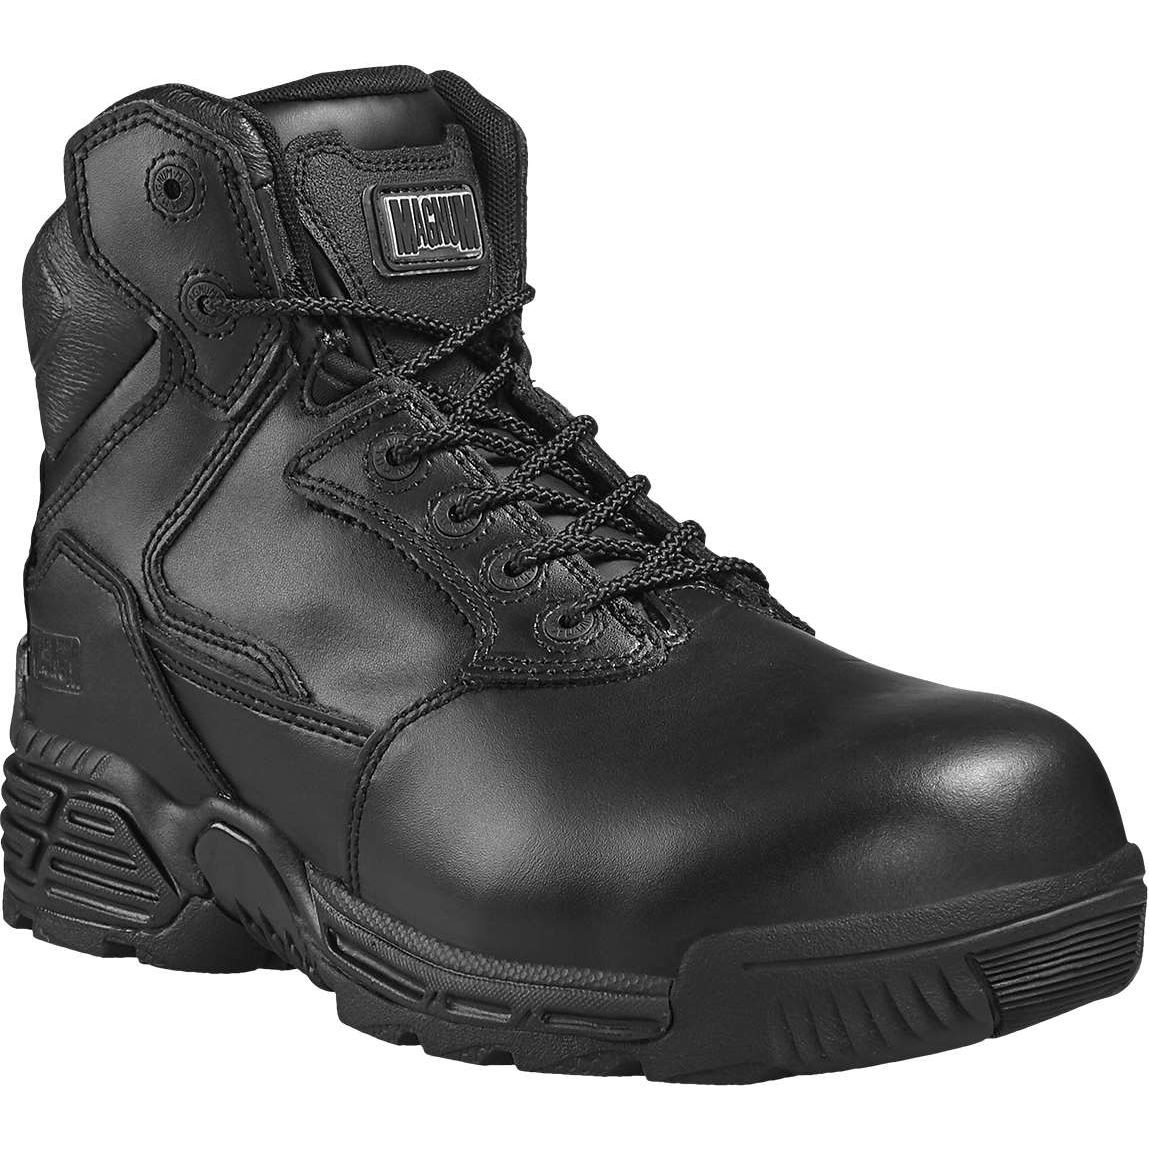 Magnum Stealth Force 6.0 Leather Safety Boots